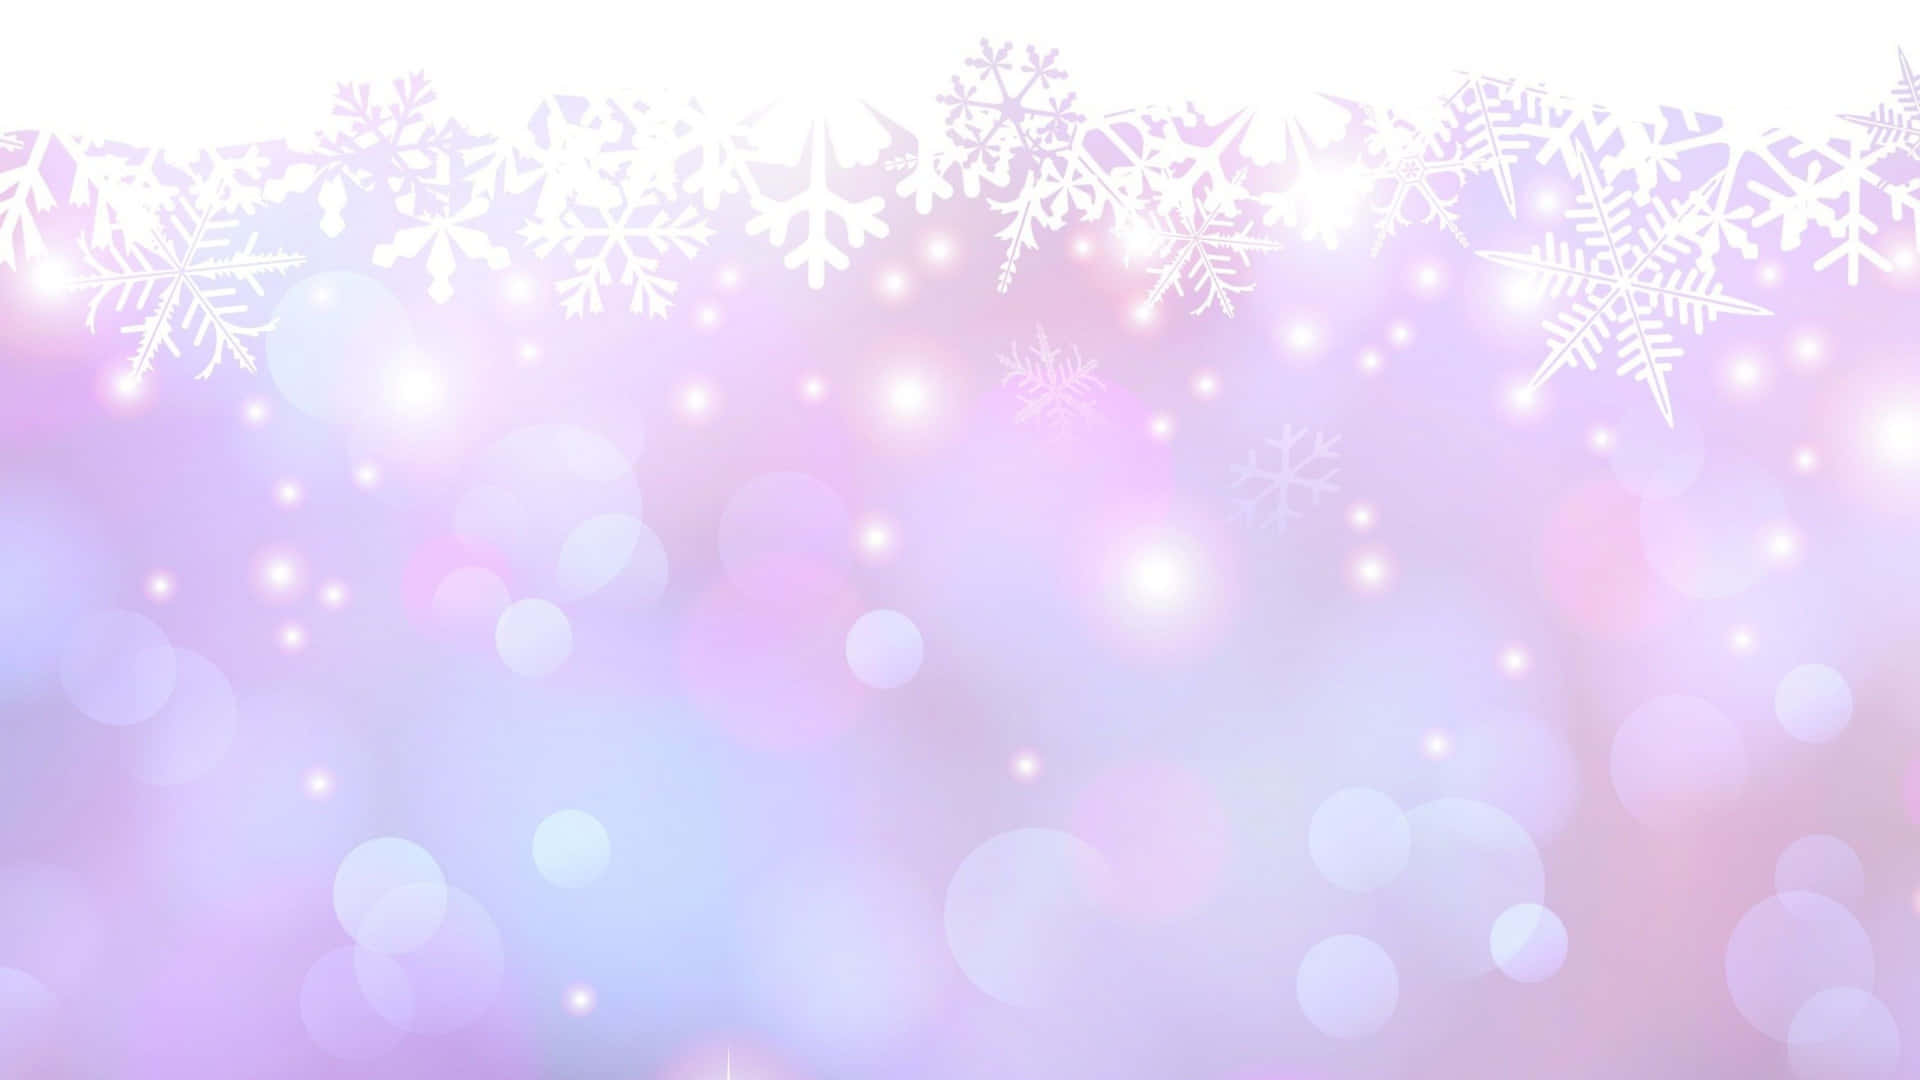 Bright Background Of Snowflakes And Sparkles